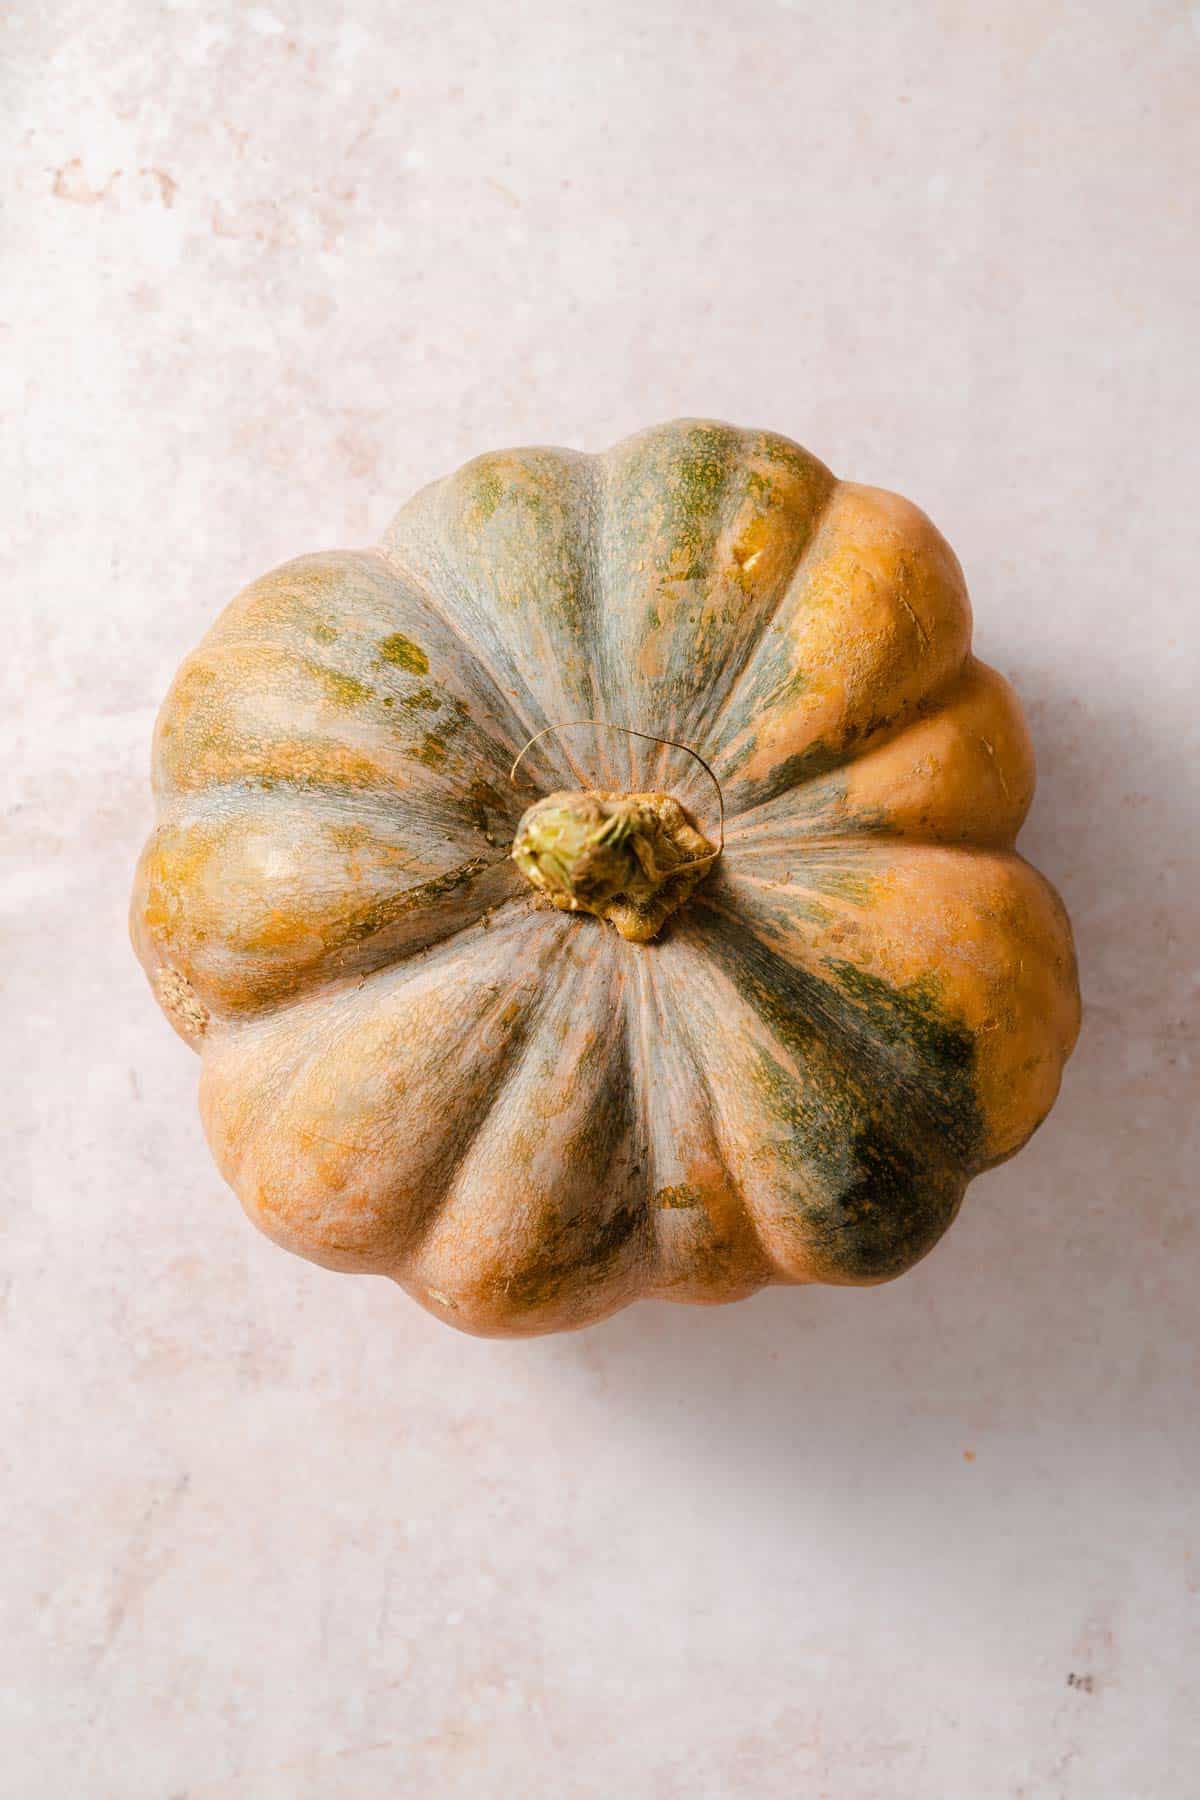 Overhead view of a large pumpkin.